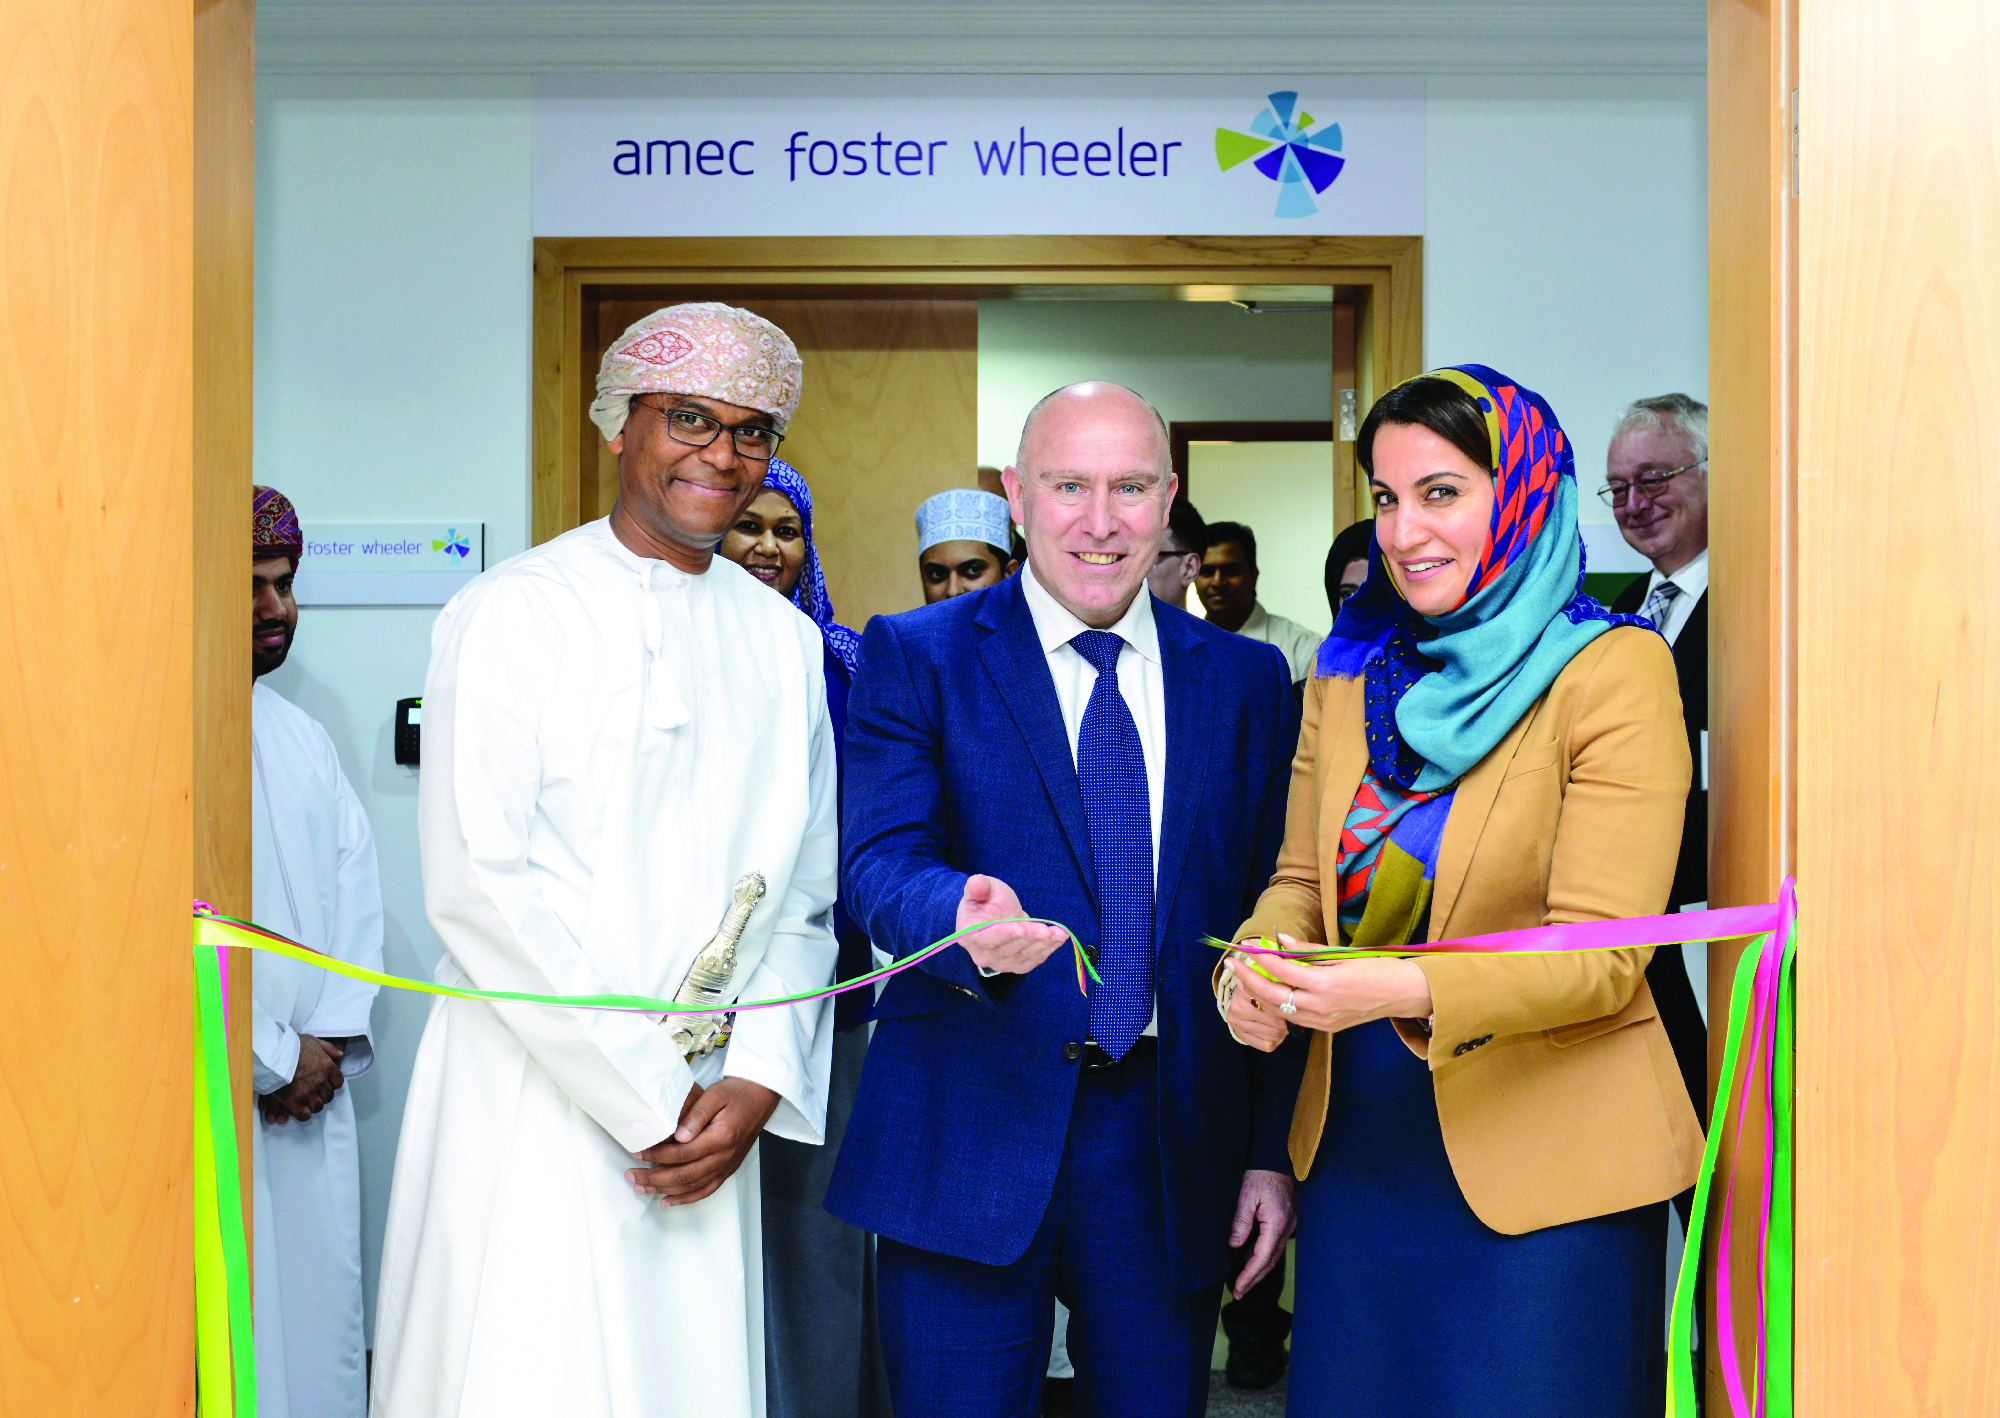 Amec Foster Wheeler opens new office to support customers in Oman